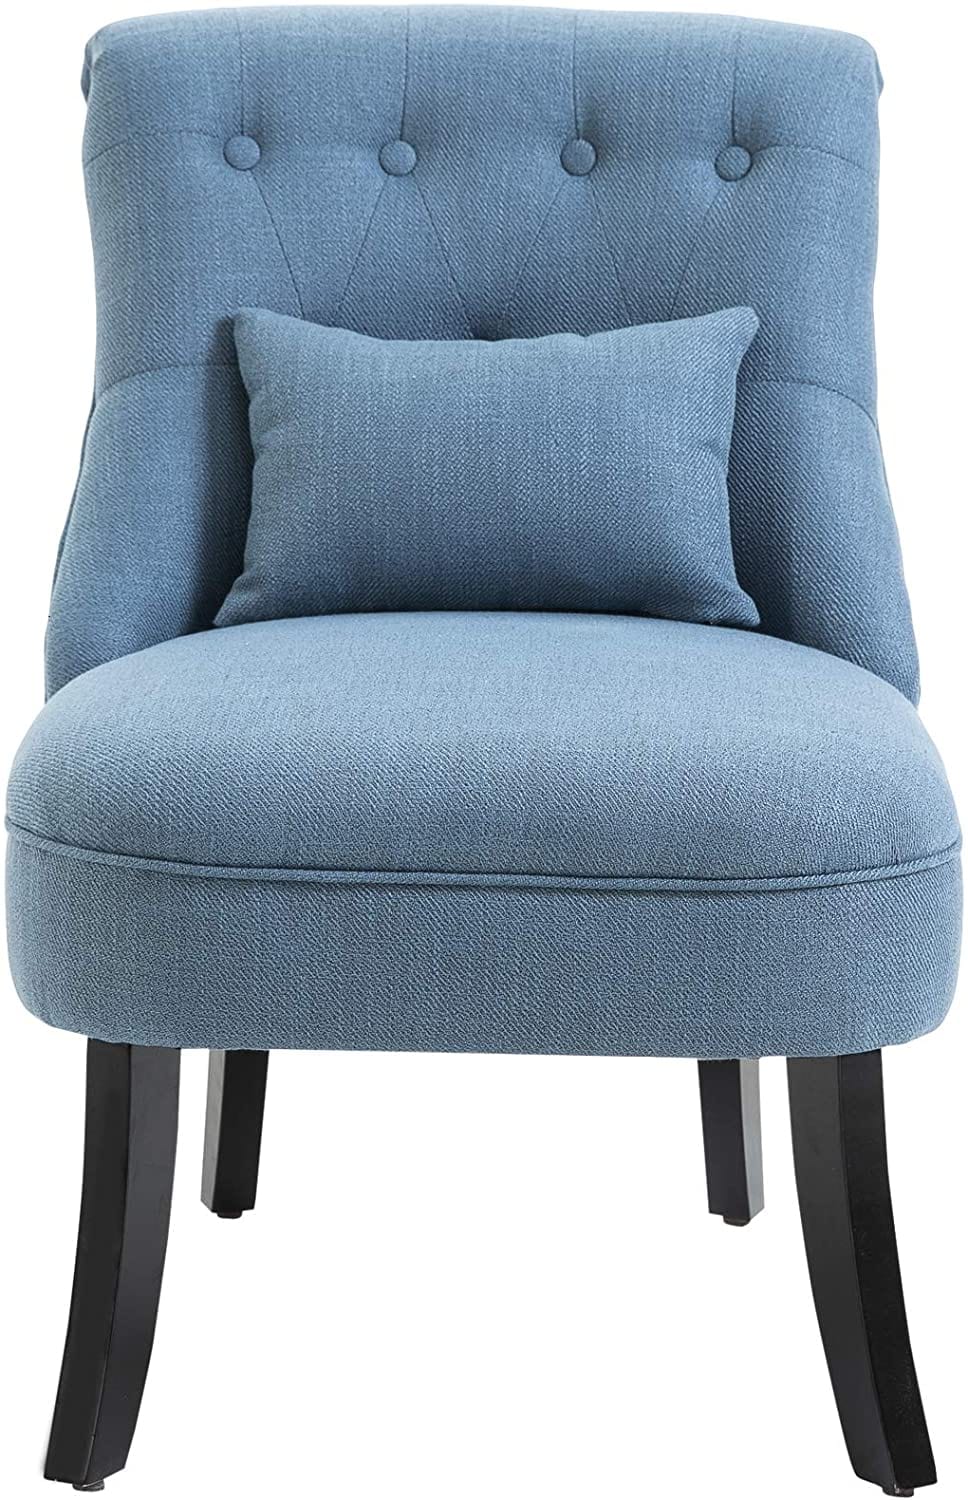 Fabric Single Sofa Dining Chair Tub Chair Upholstered W/Pillow Solid Wood Leg Home Living Room Furniture Blue